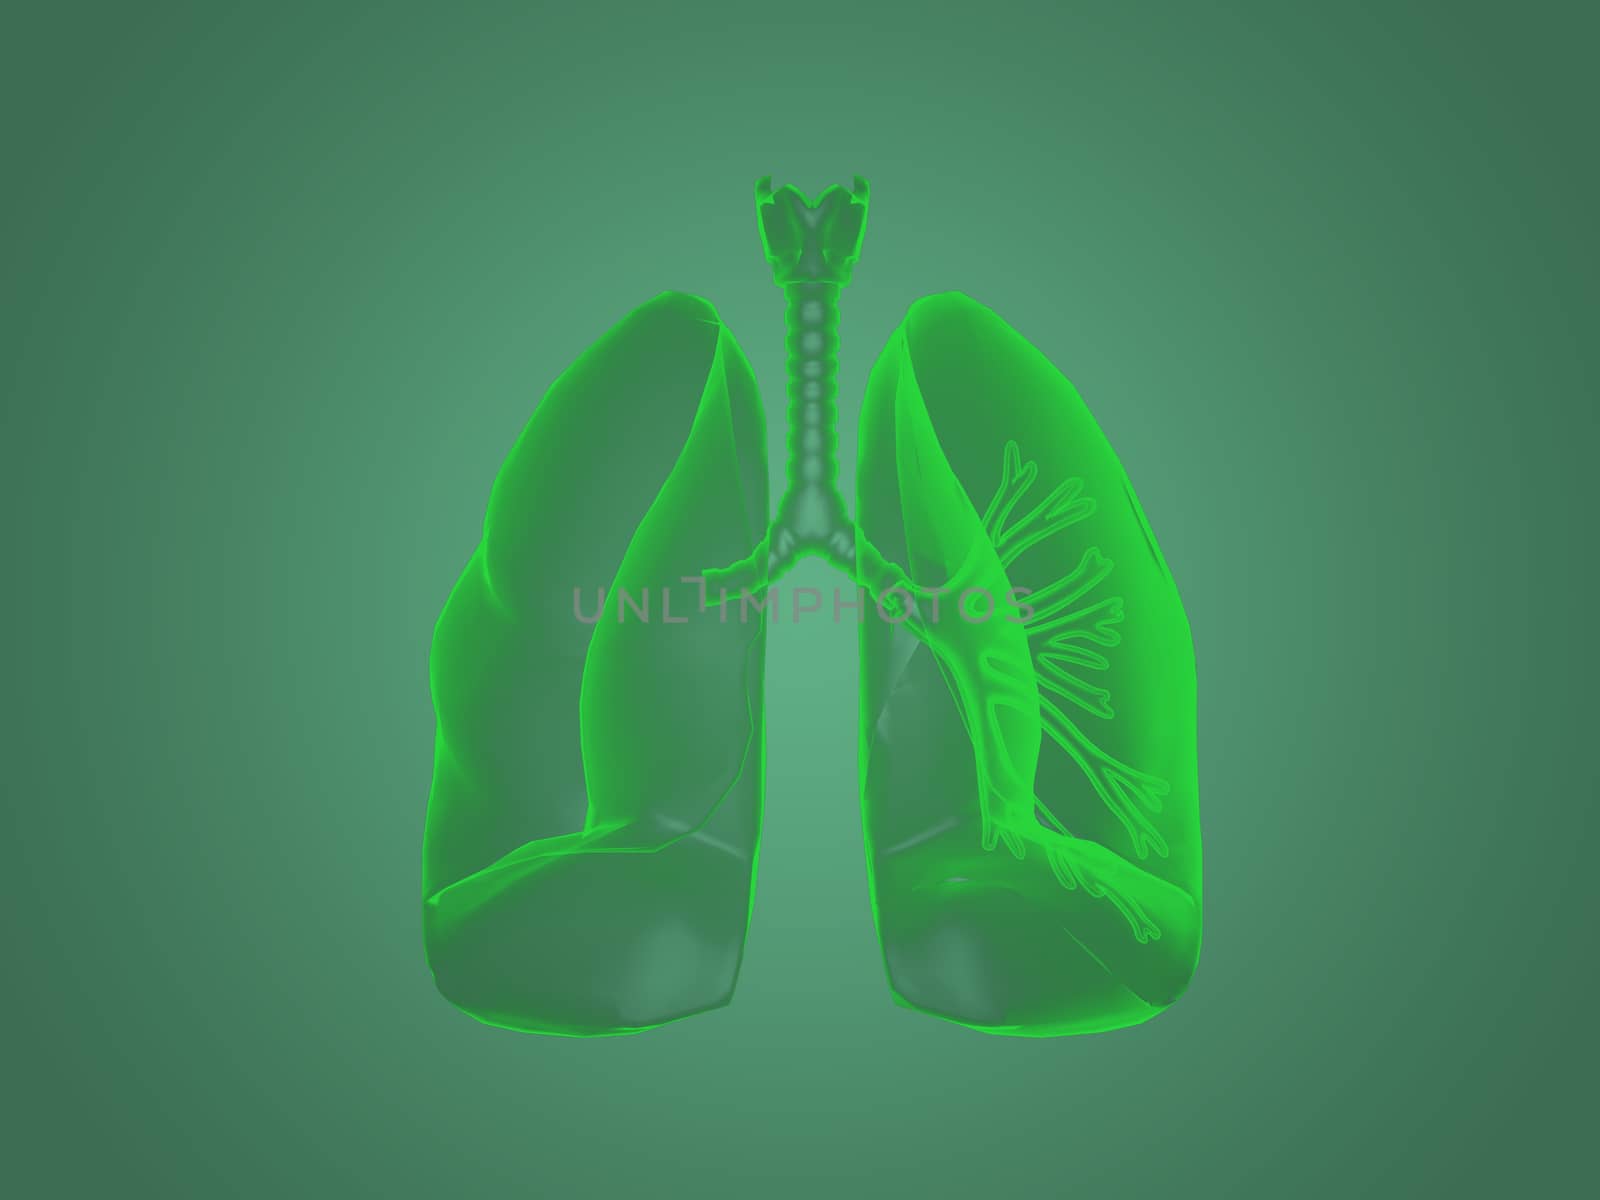 X-ray Lungs anatomy